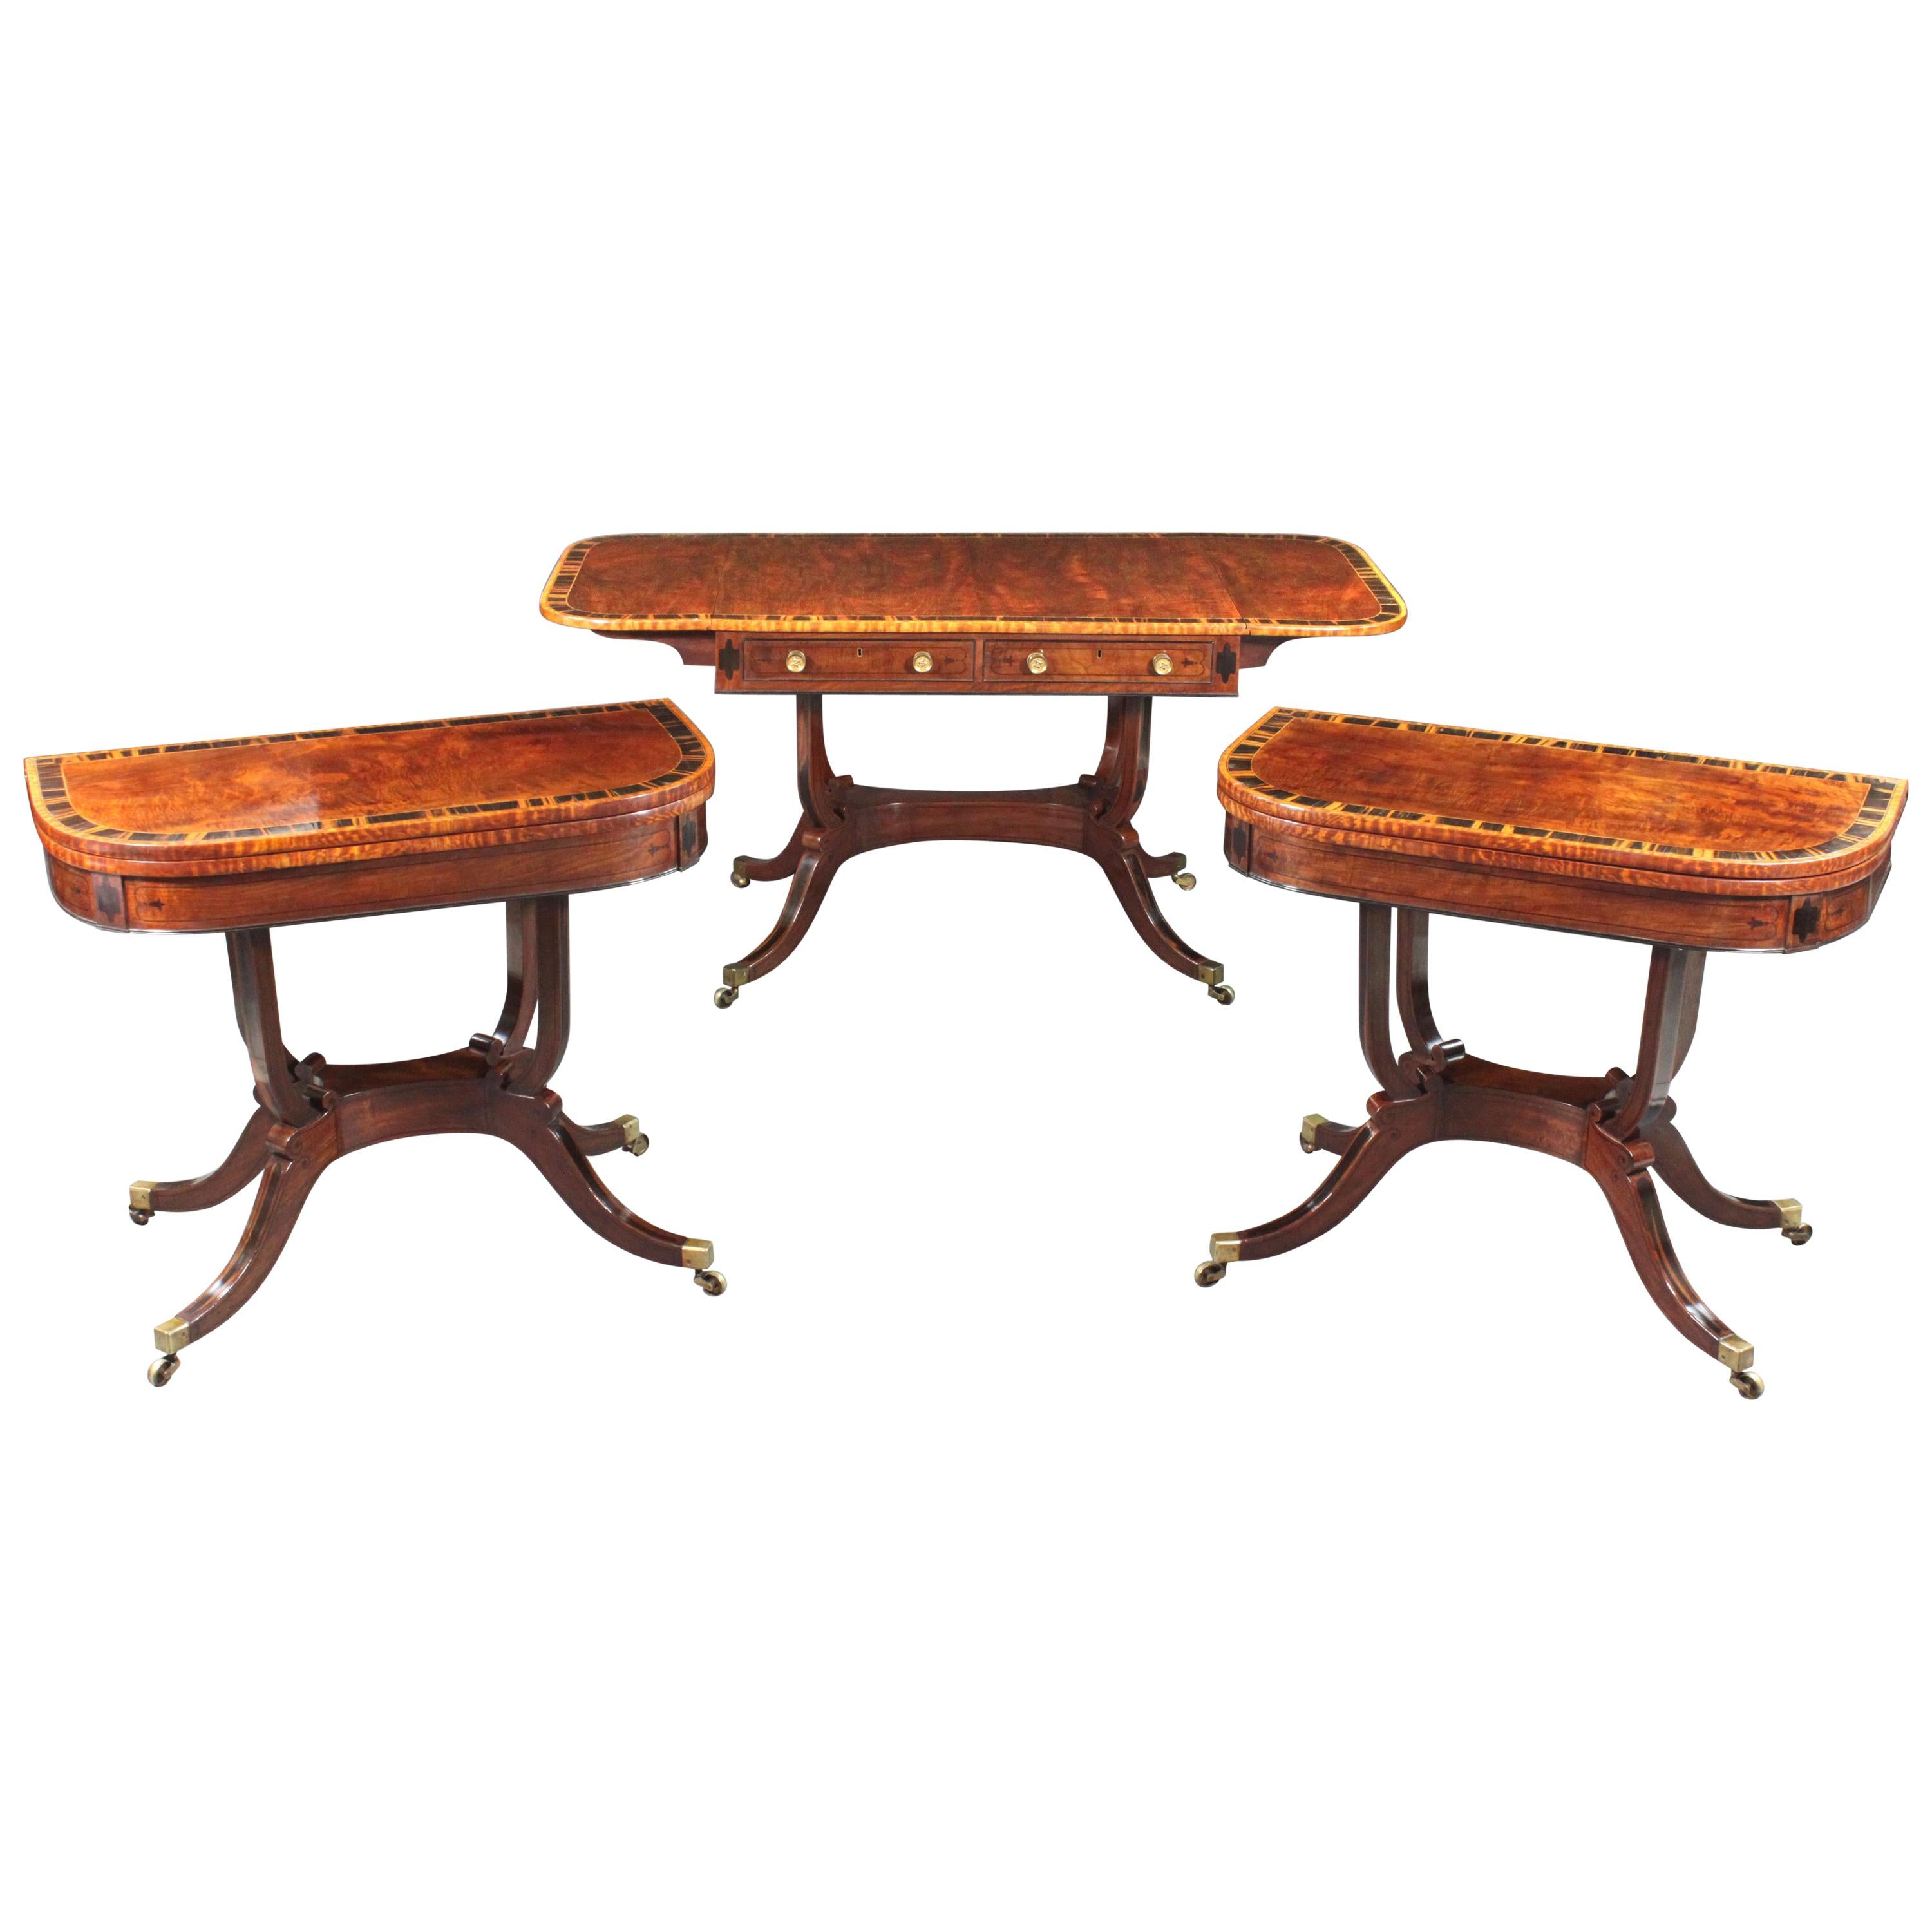 Regency Pair of Card Tables with Matching Sofa Table